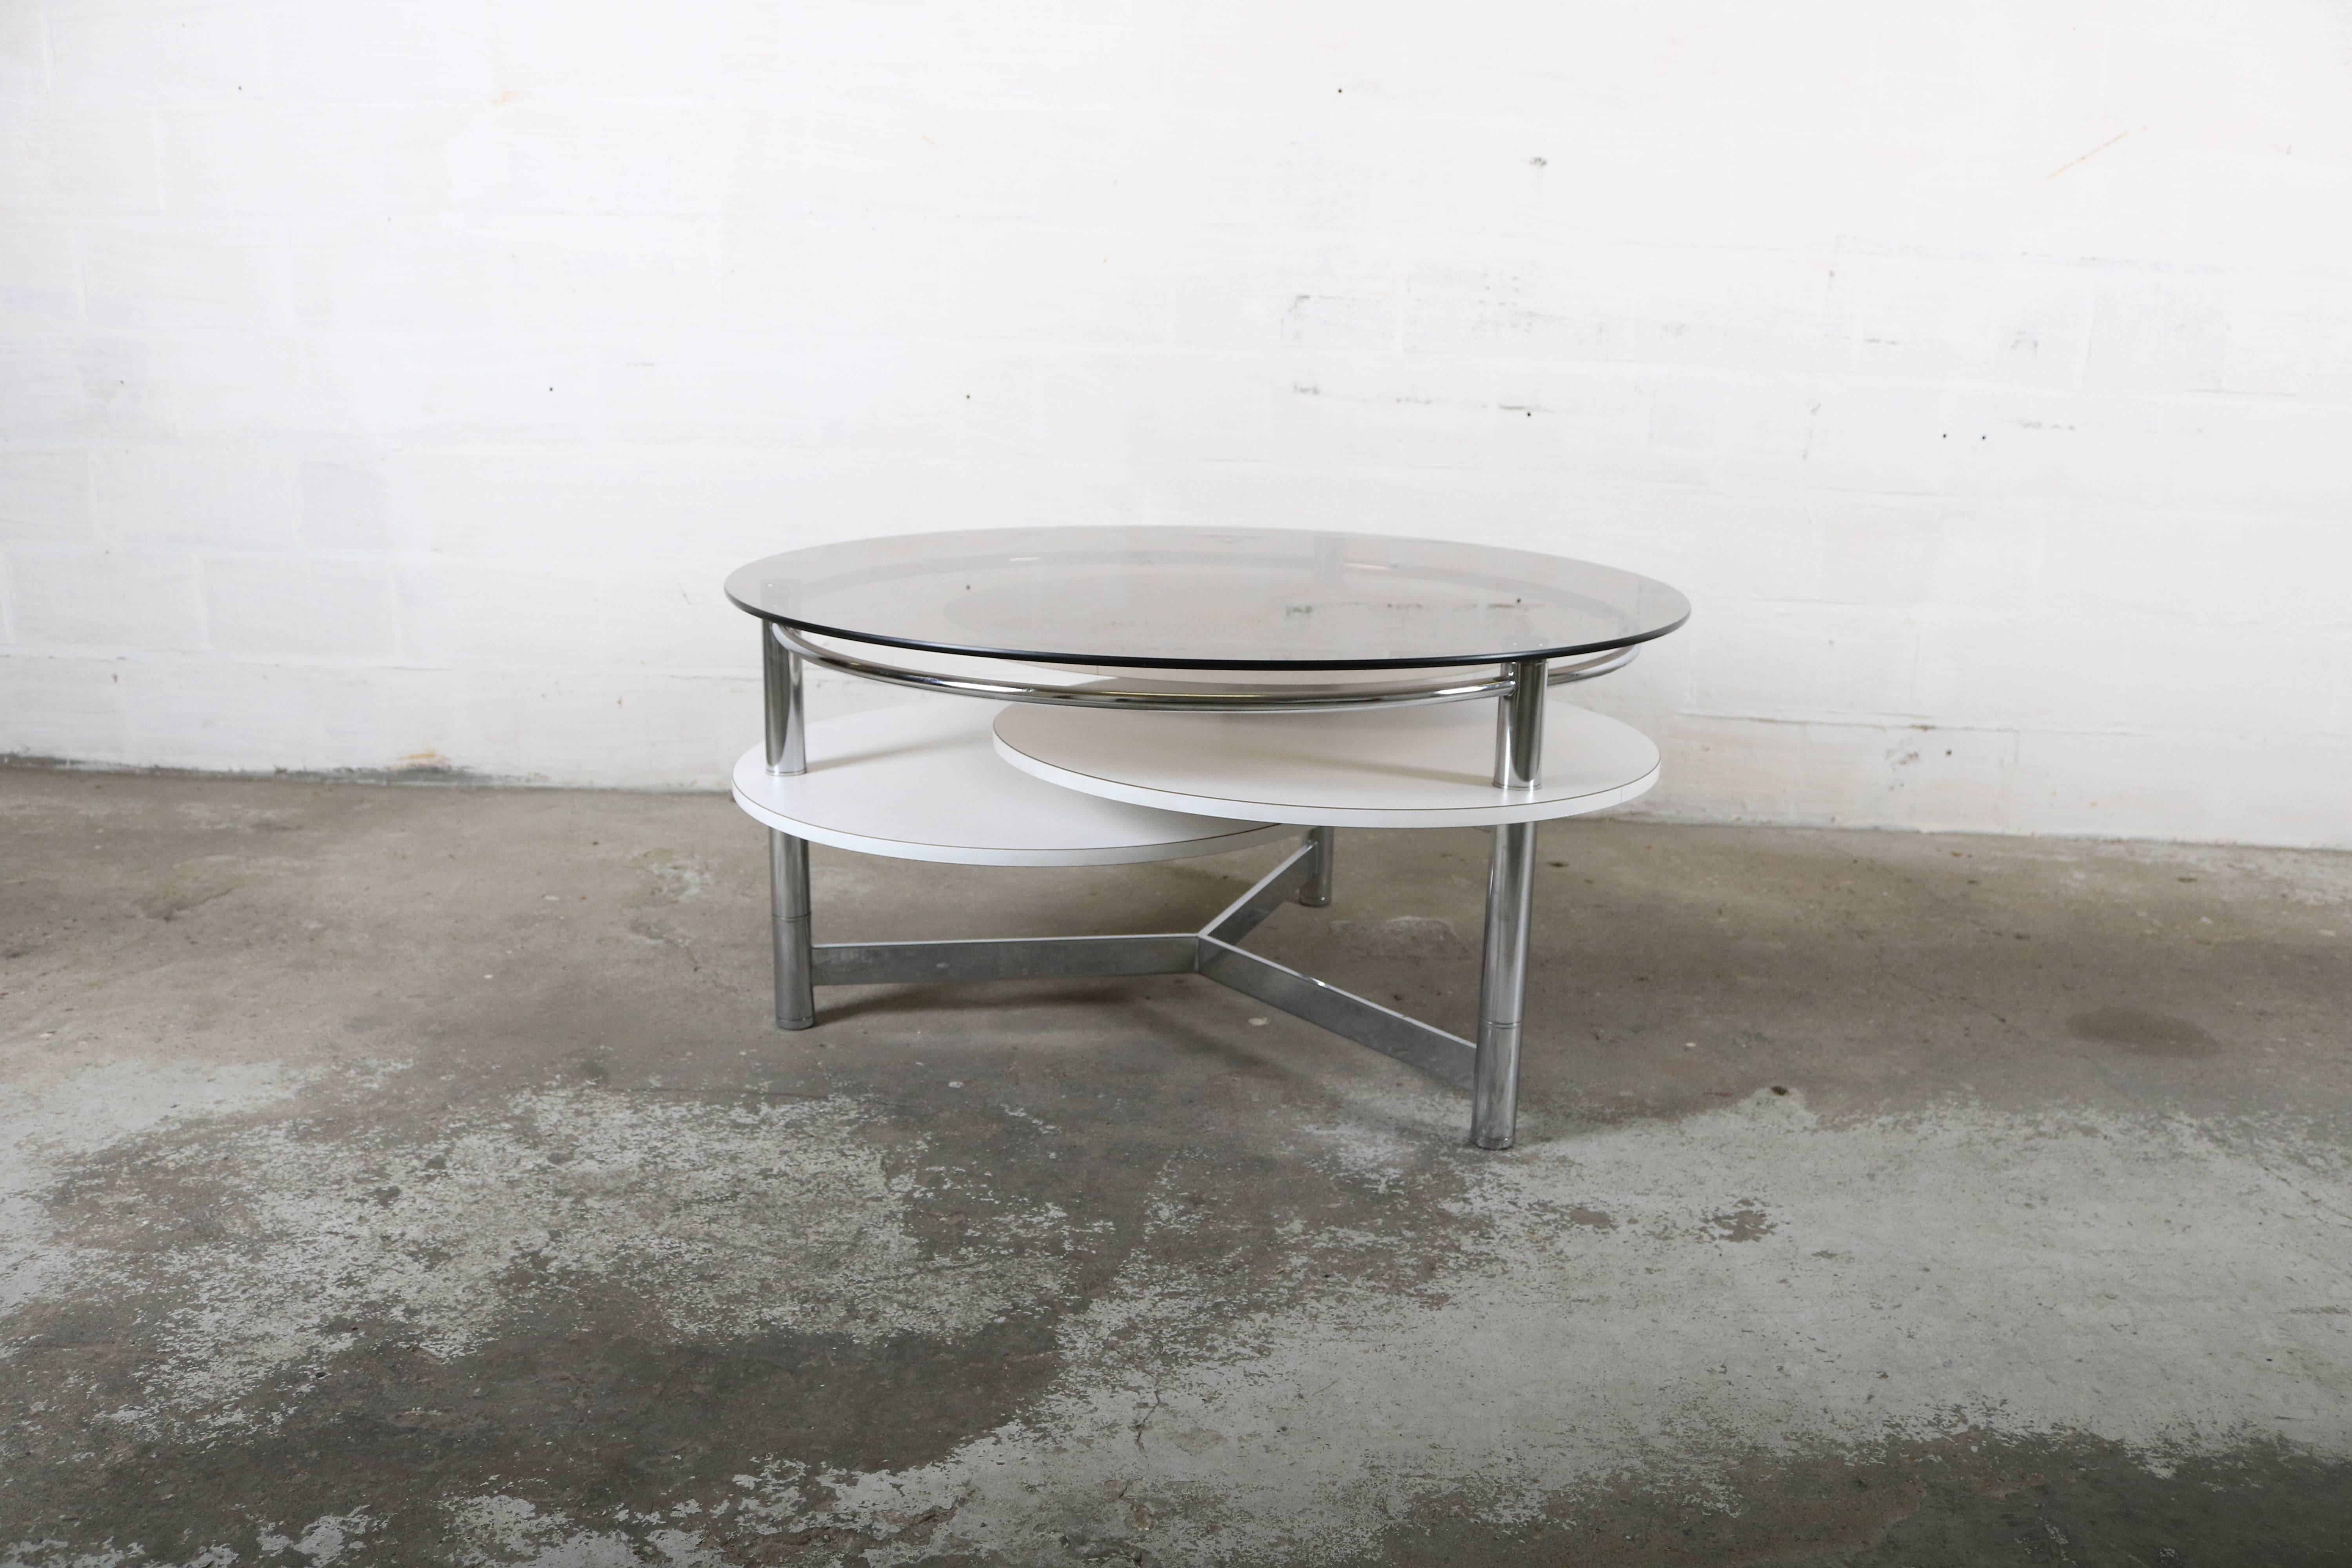 Design coffee table with rotating table tops.
Made of chrome metal base and white formica table tops.
The top table is made of glass.